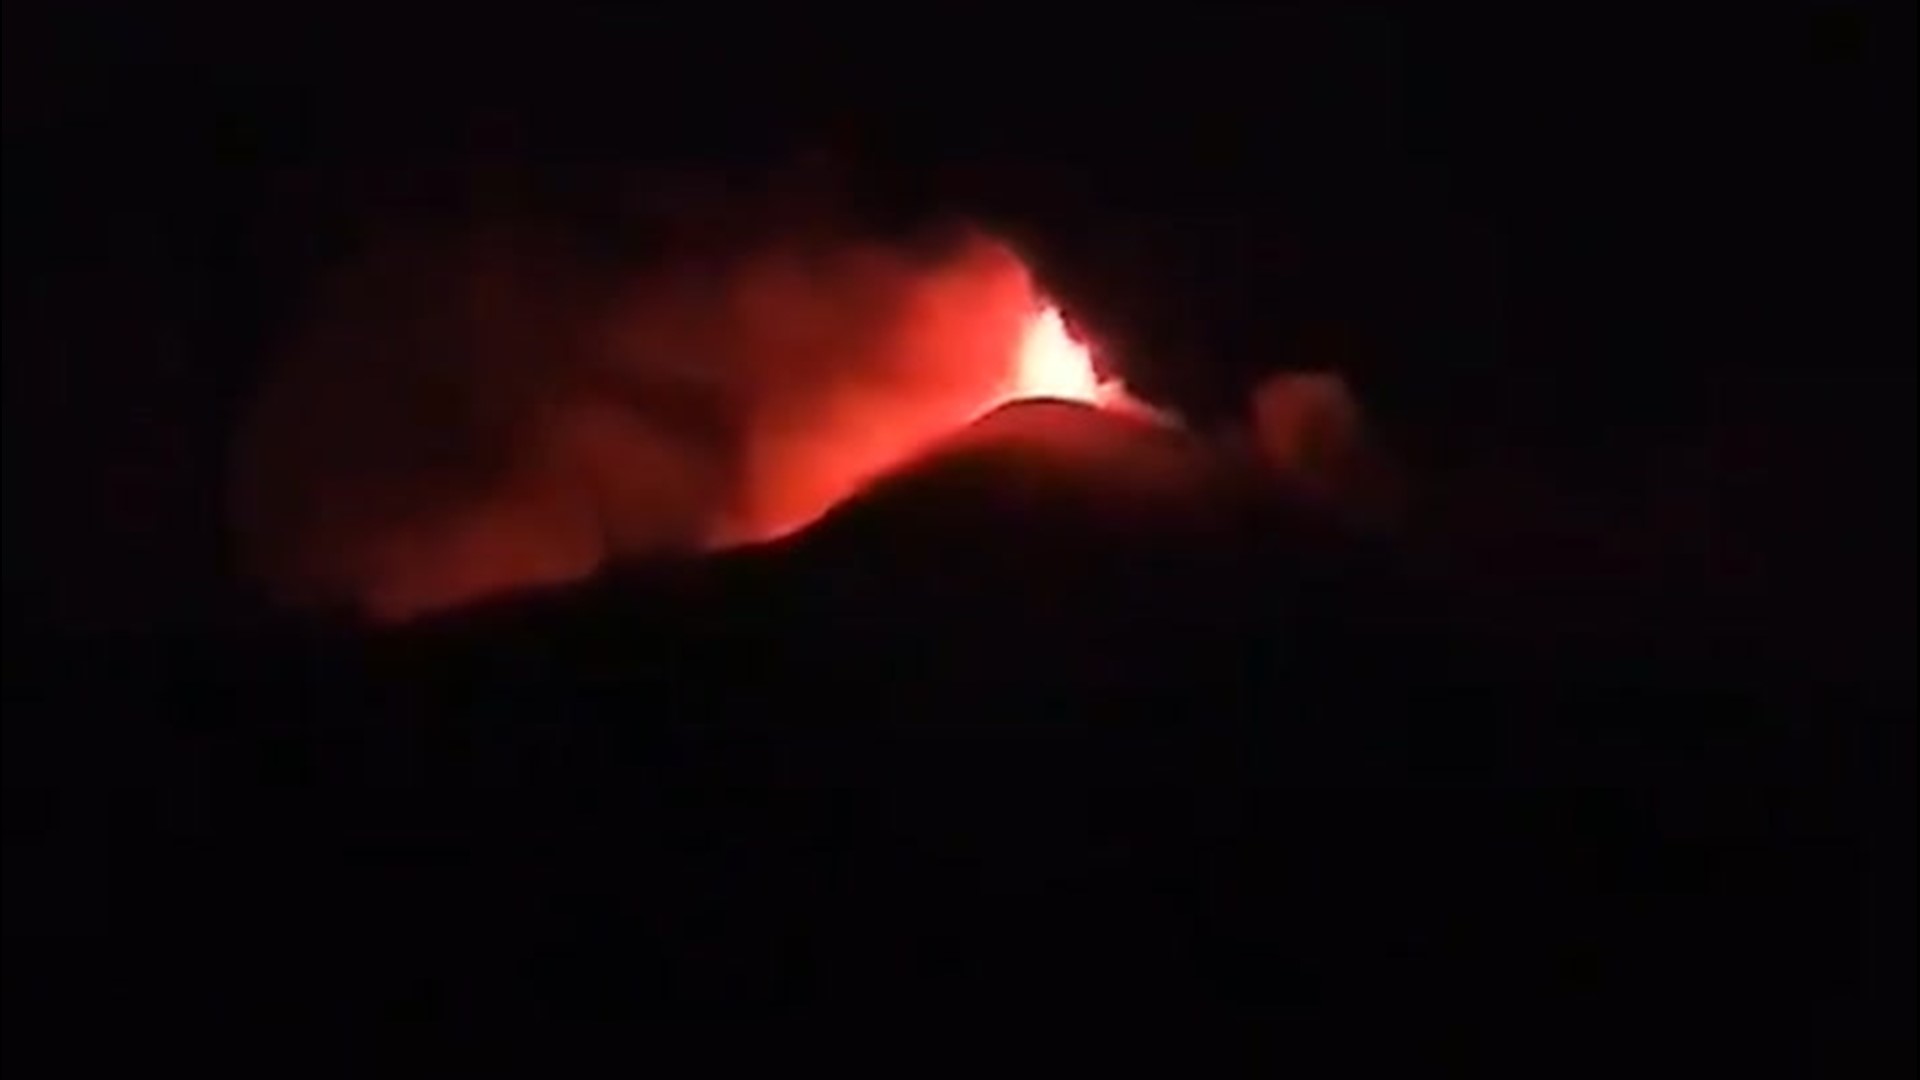 Lava gushed into the air as Guatemala's Pacaya Volcano erupted in the overnight hours on March 3.